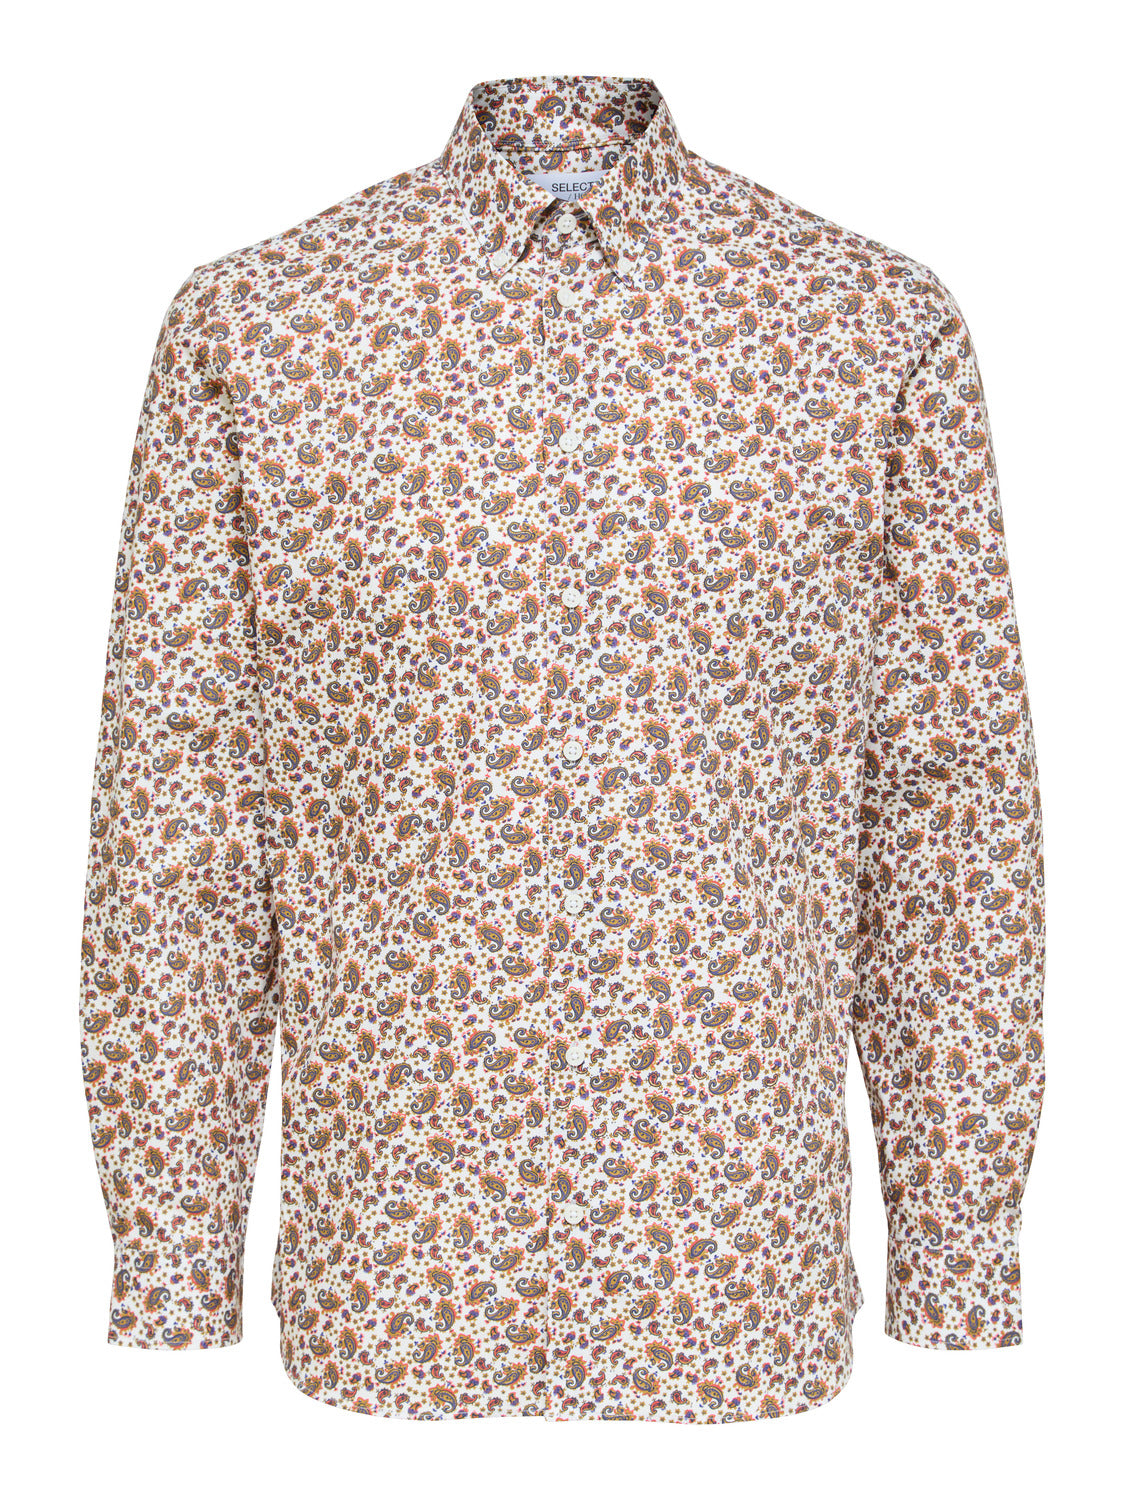 SELECTED HOMME - SLIMHUGO Shirts - Bright White